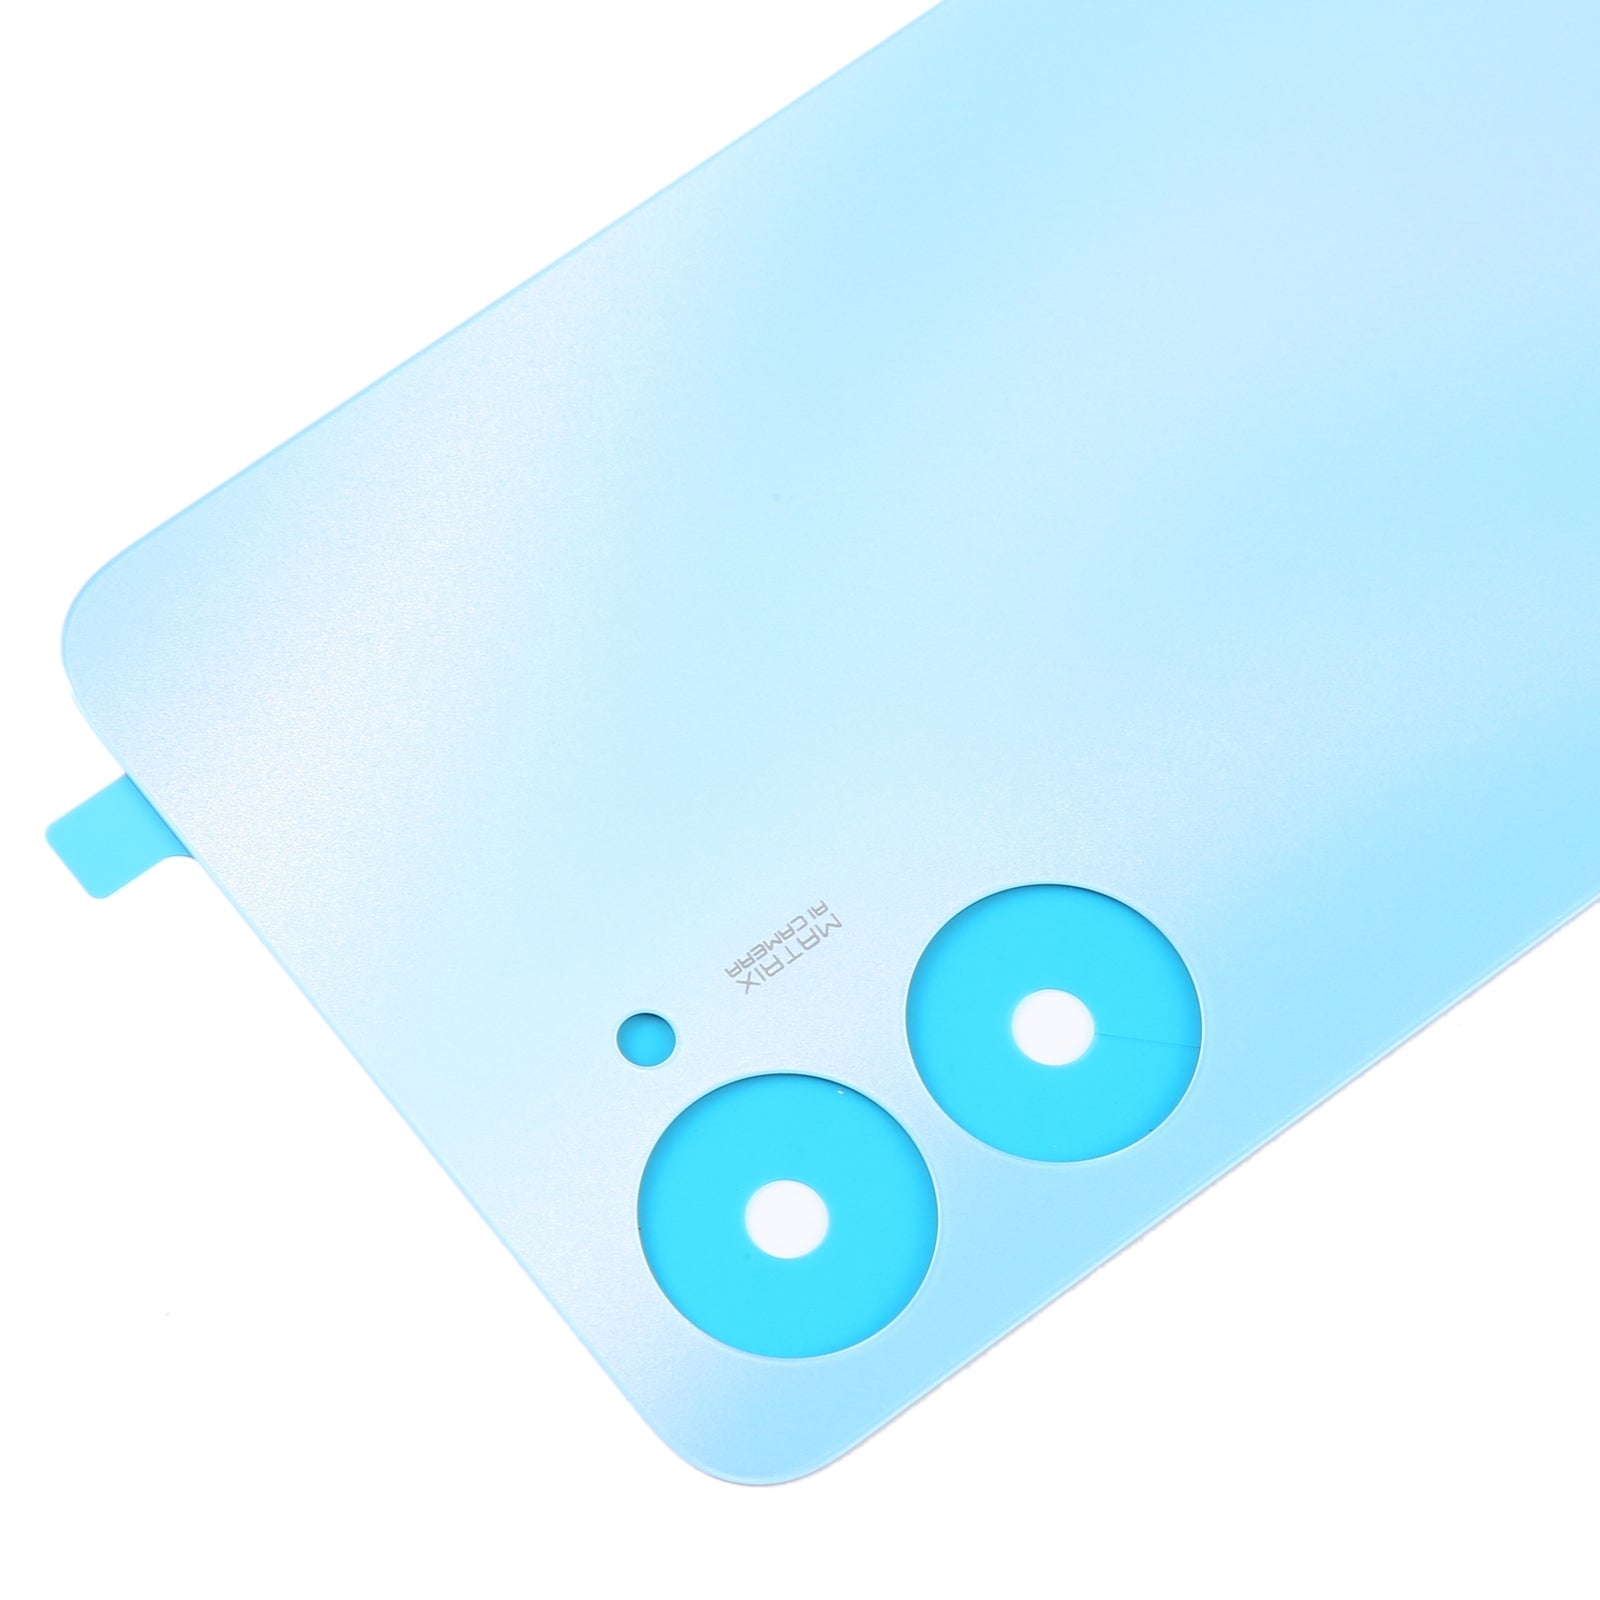 Battery Cover Back Cover Realme 10 Pro Blue